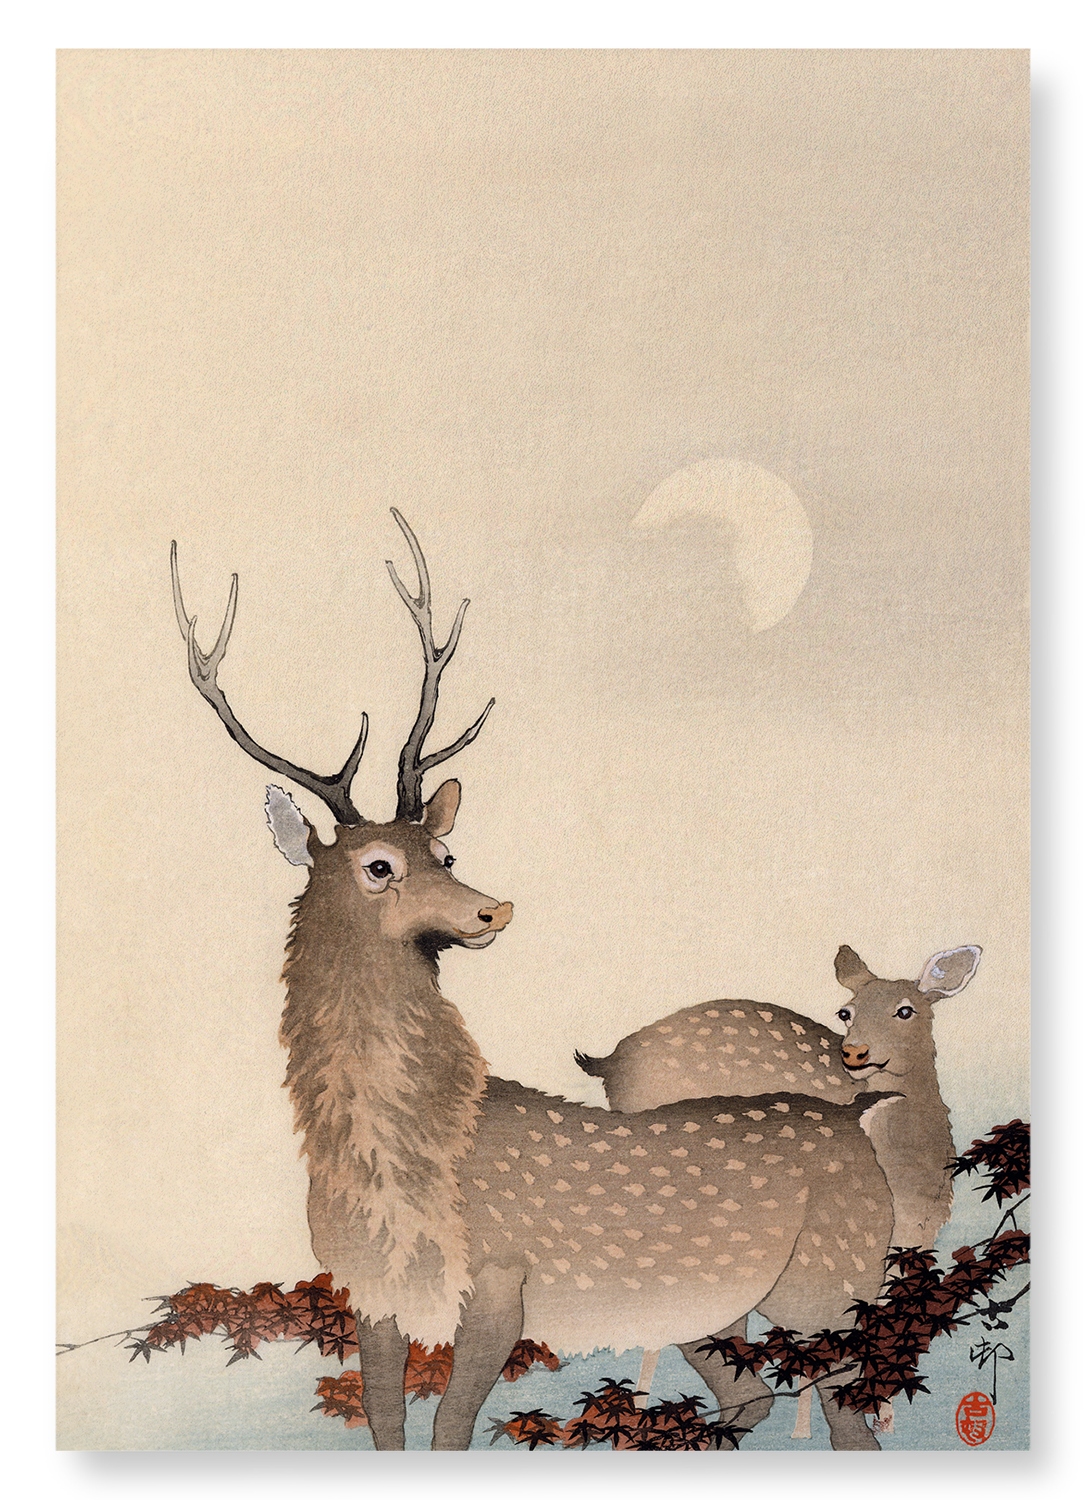 TWO DEER AND MAPLE: Japanese Art Print